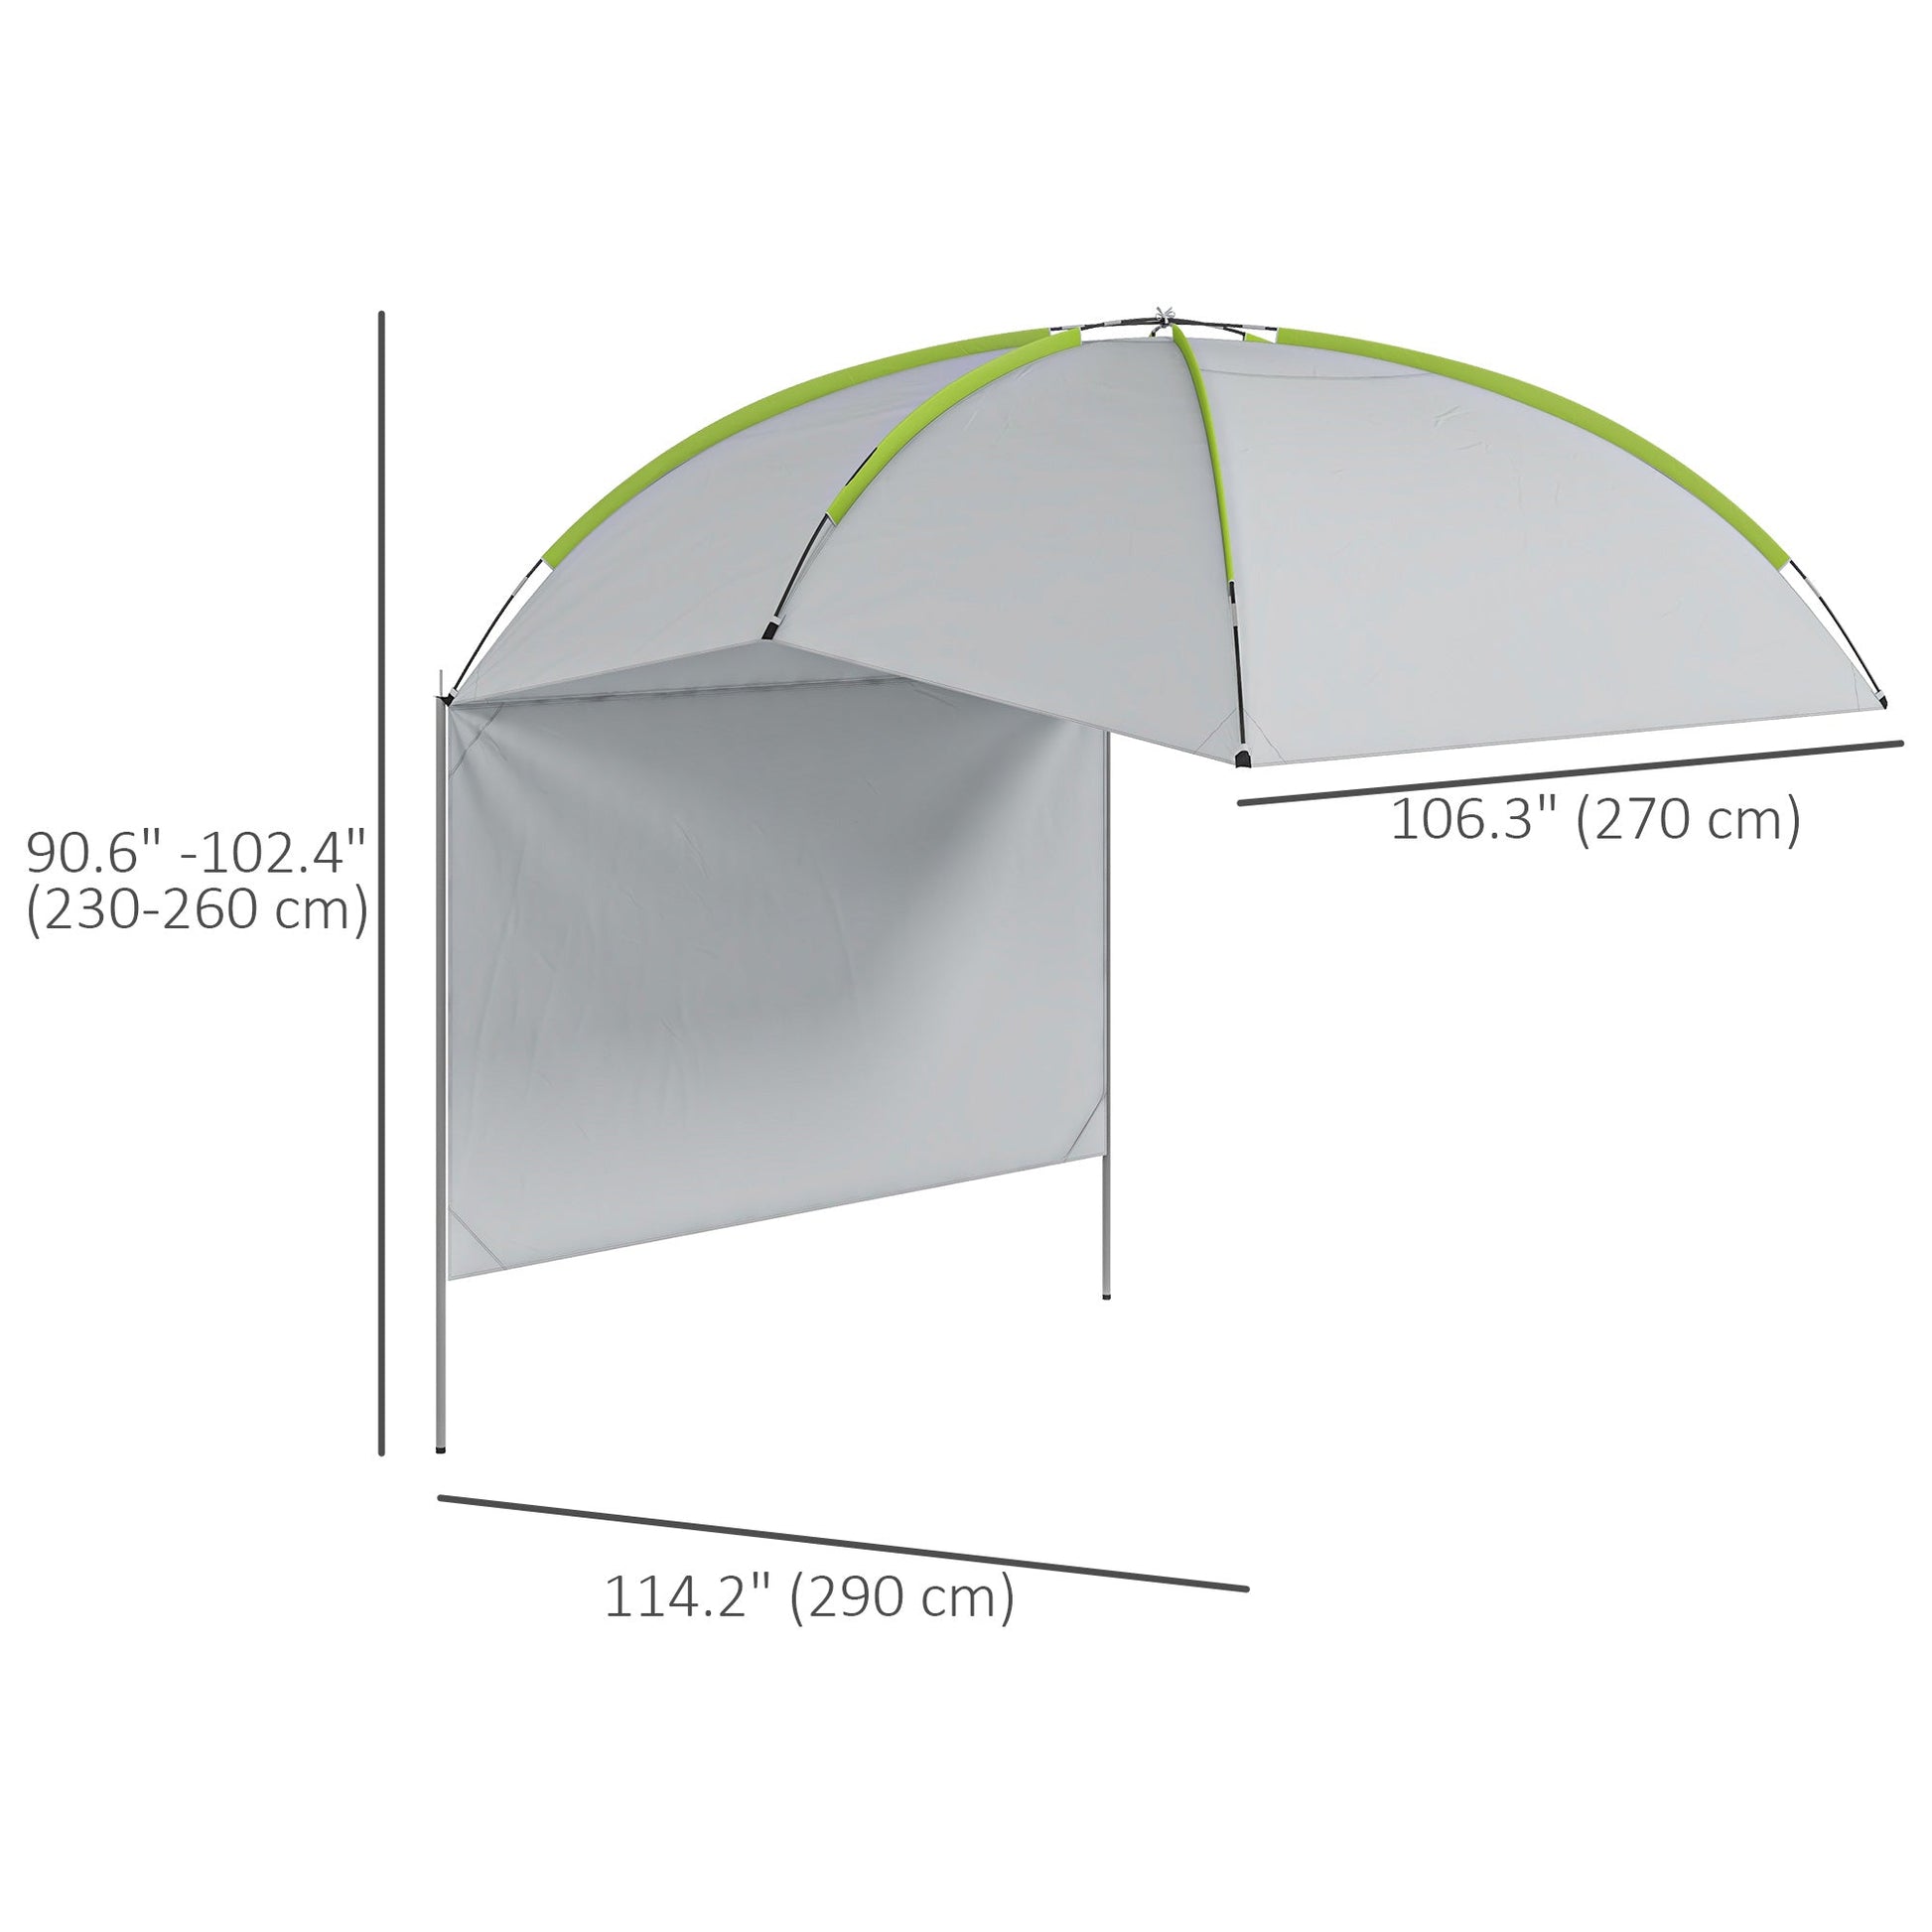 SUV Awning Tailgate Tent, Portable Car Awning with Side Wall, for Truck, RV, Van, Trailer and Overlanding Camping at Gallery Canada